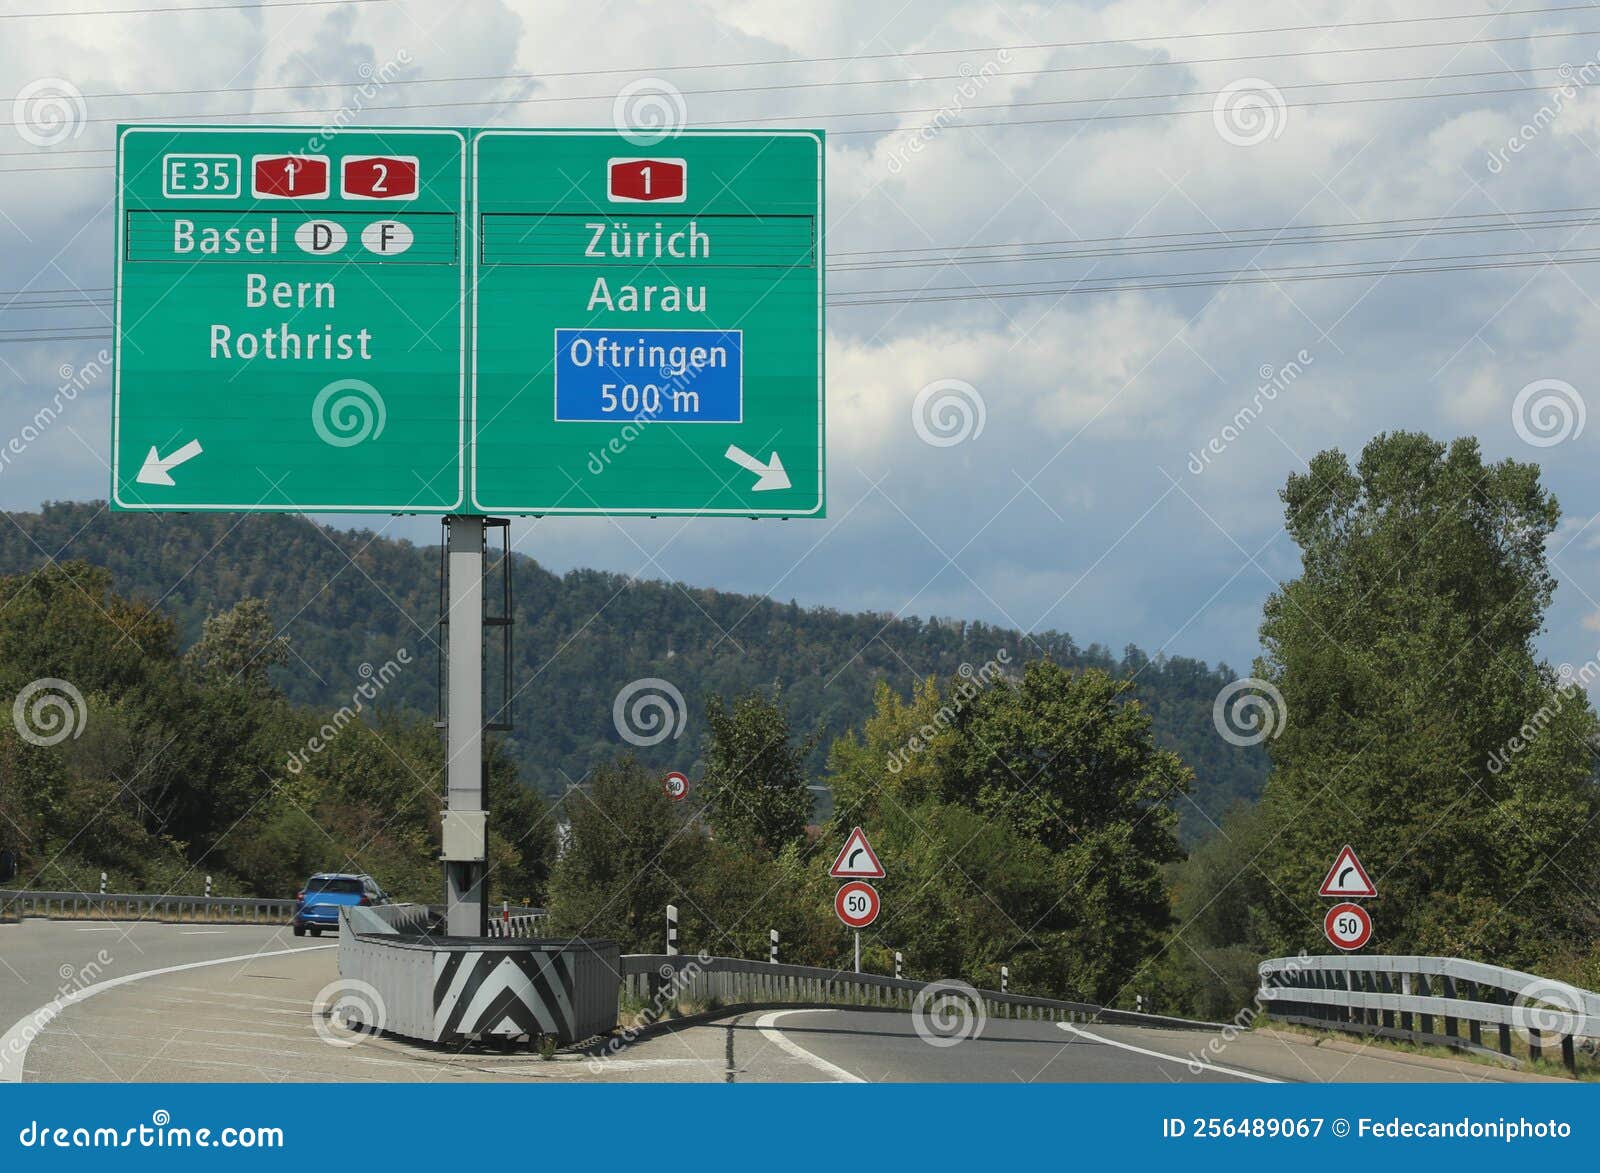 road sign of the swiss highway with directions to reach european cities